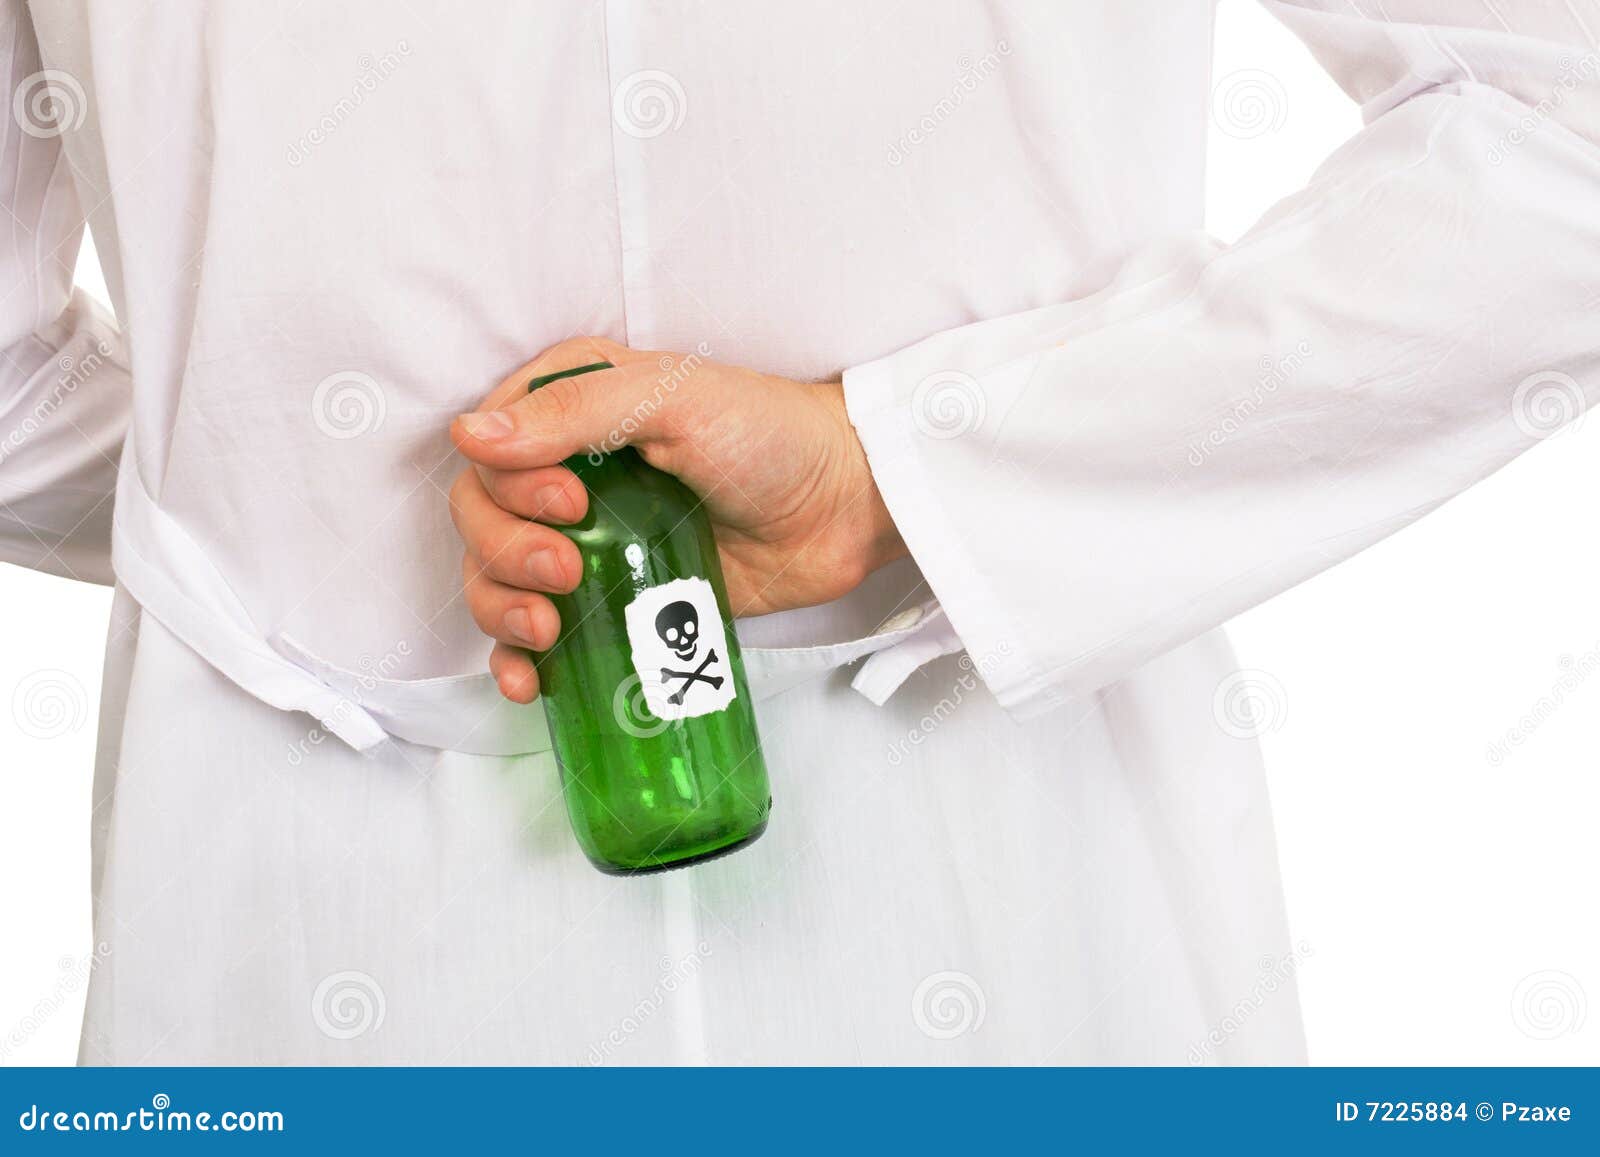 hand with green bottle